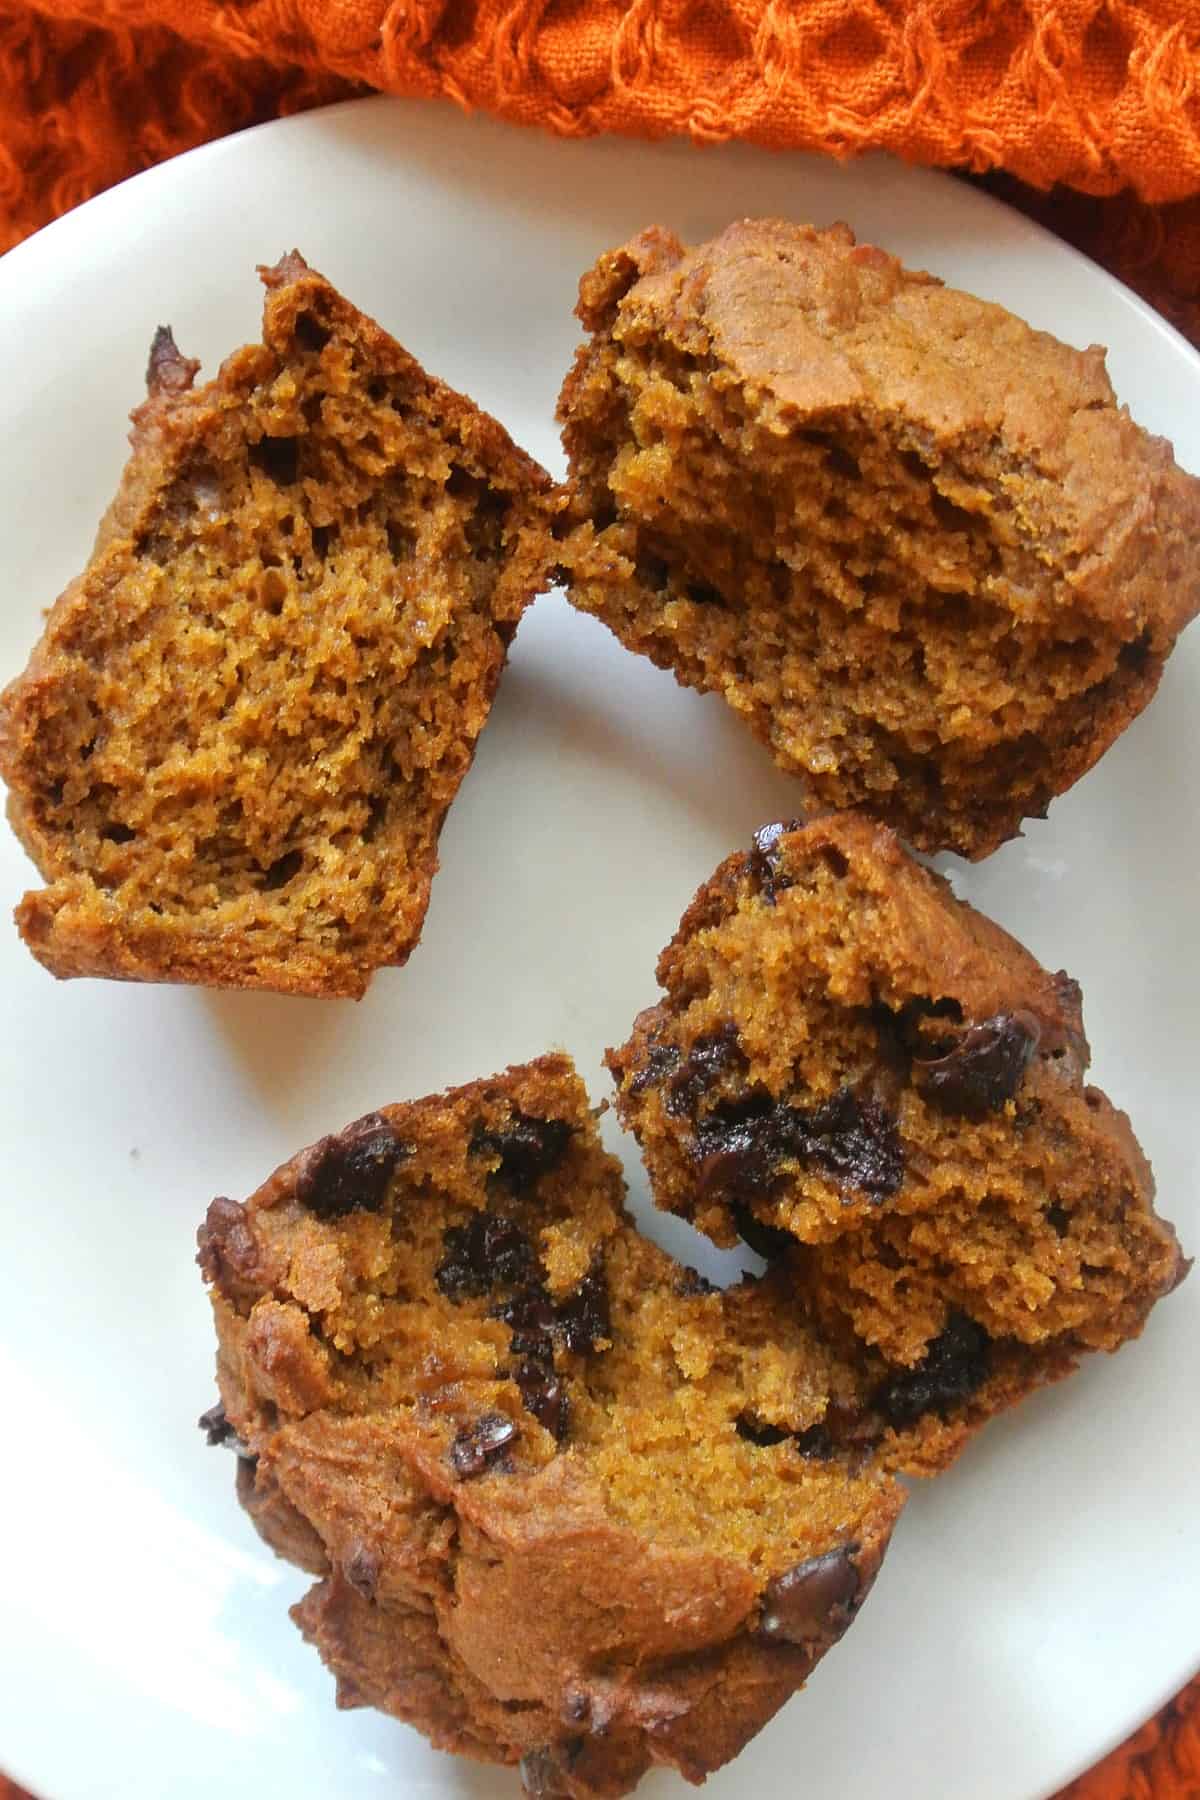 Two muffins laying open to show the insides with or without chocolate chips.